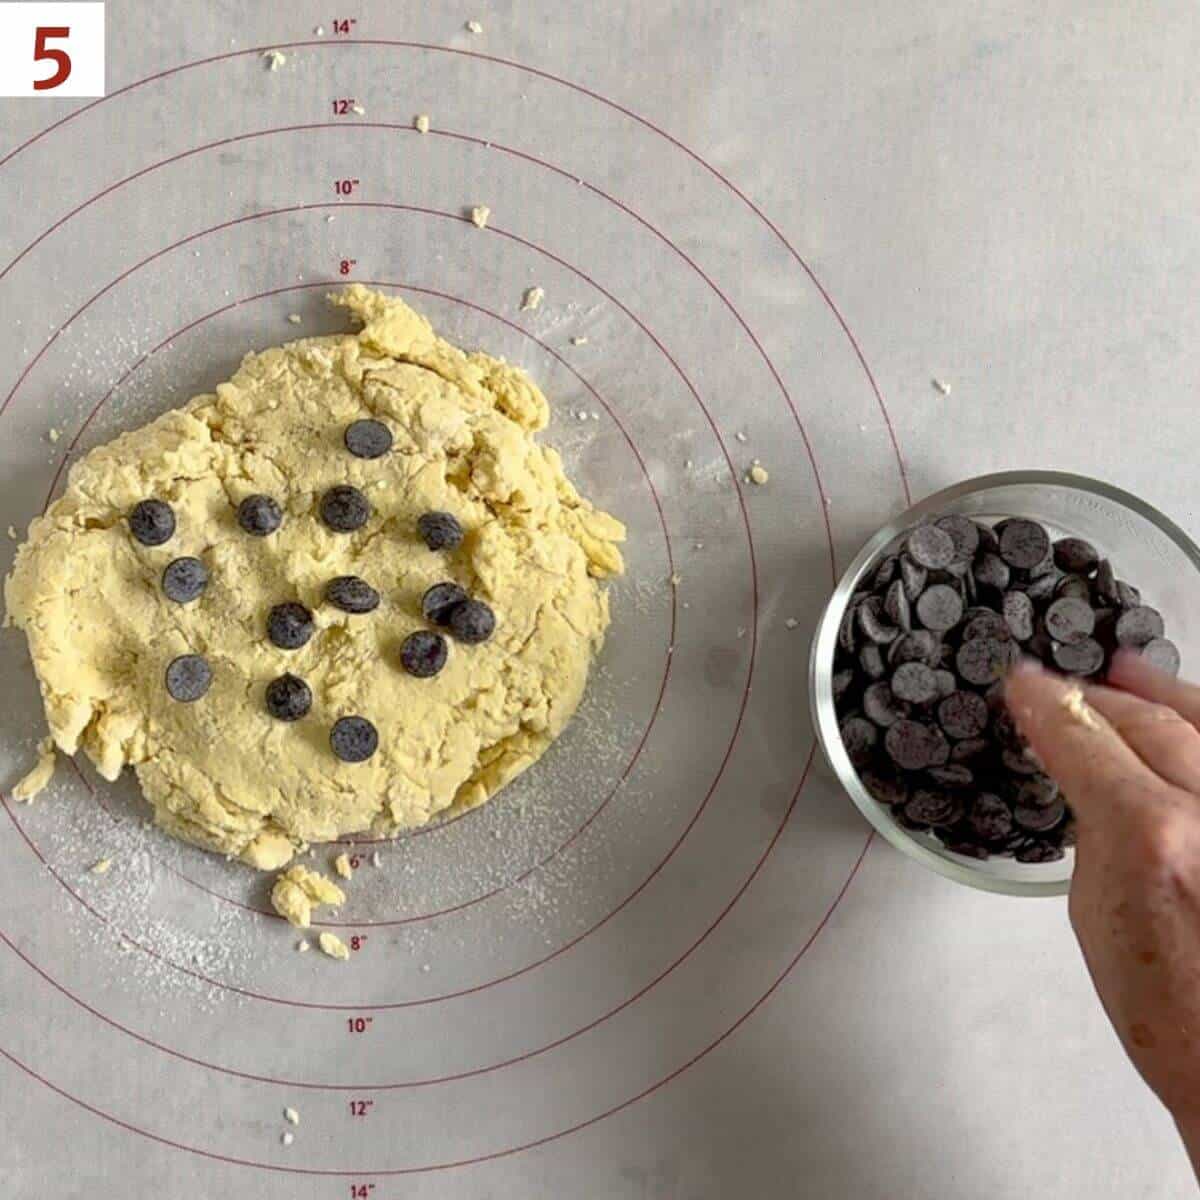 Topping scone dough with chocolate chips.